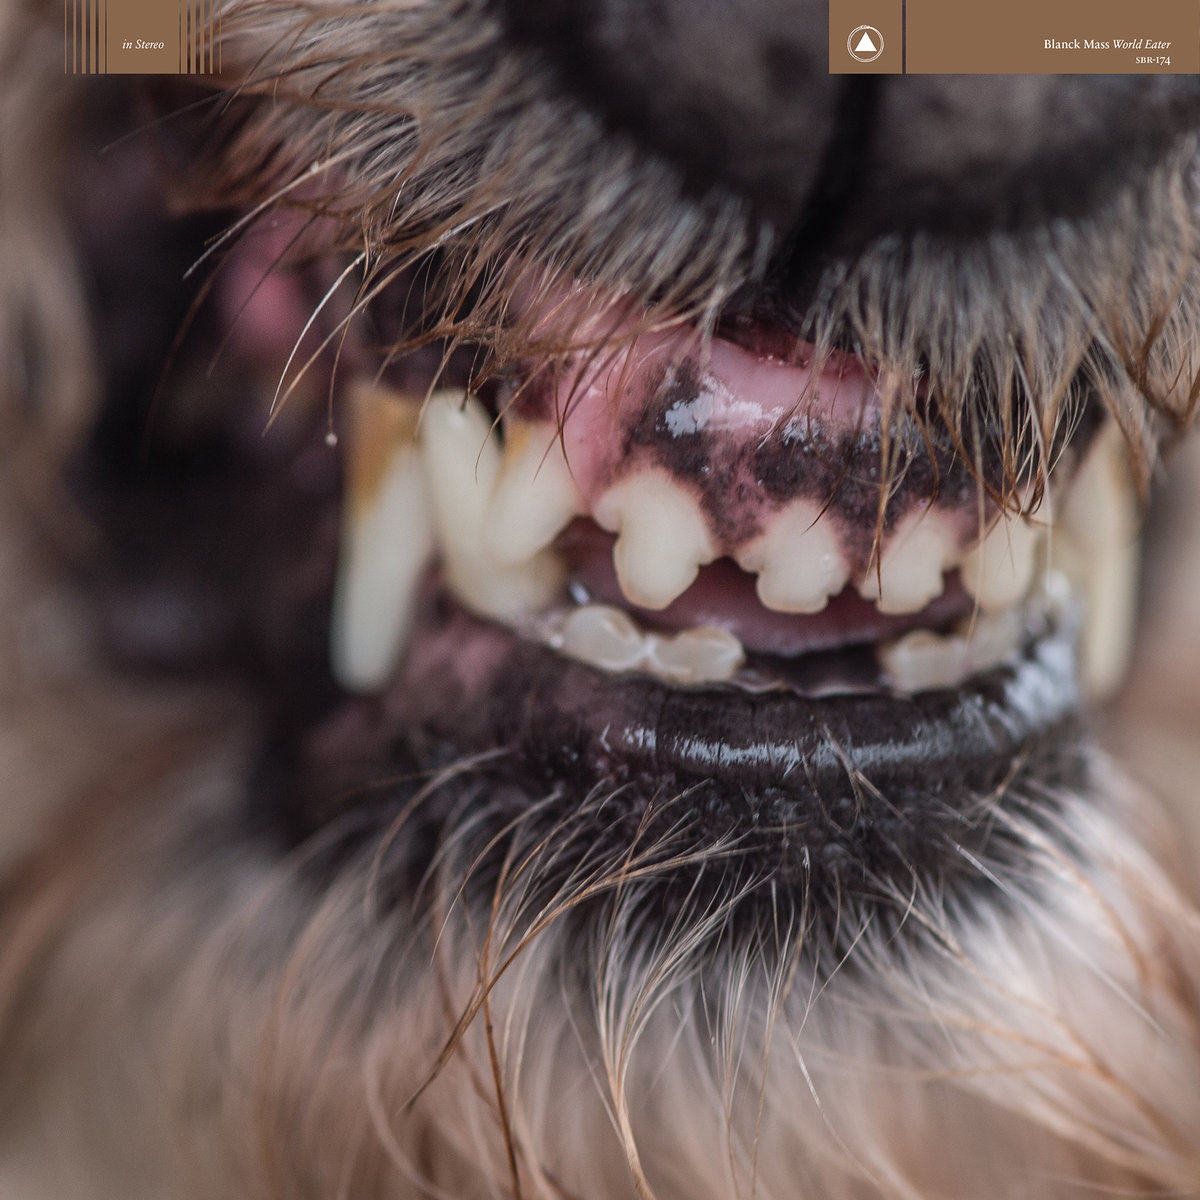 'World Eater' by Blanck Mass, album review by Josh Gabert-Doyon. The full-length comes out on March 3 via Sacred Bones.